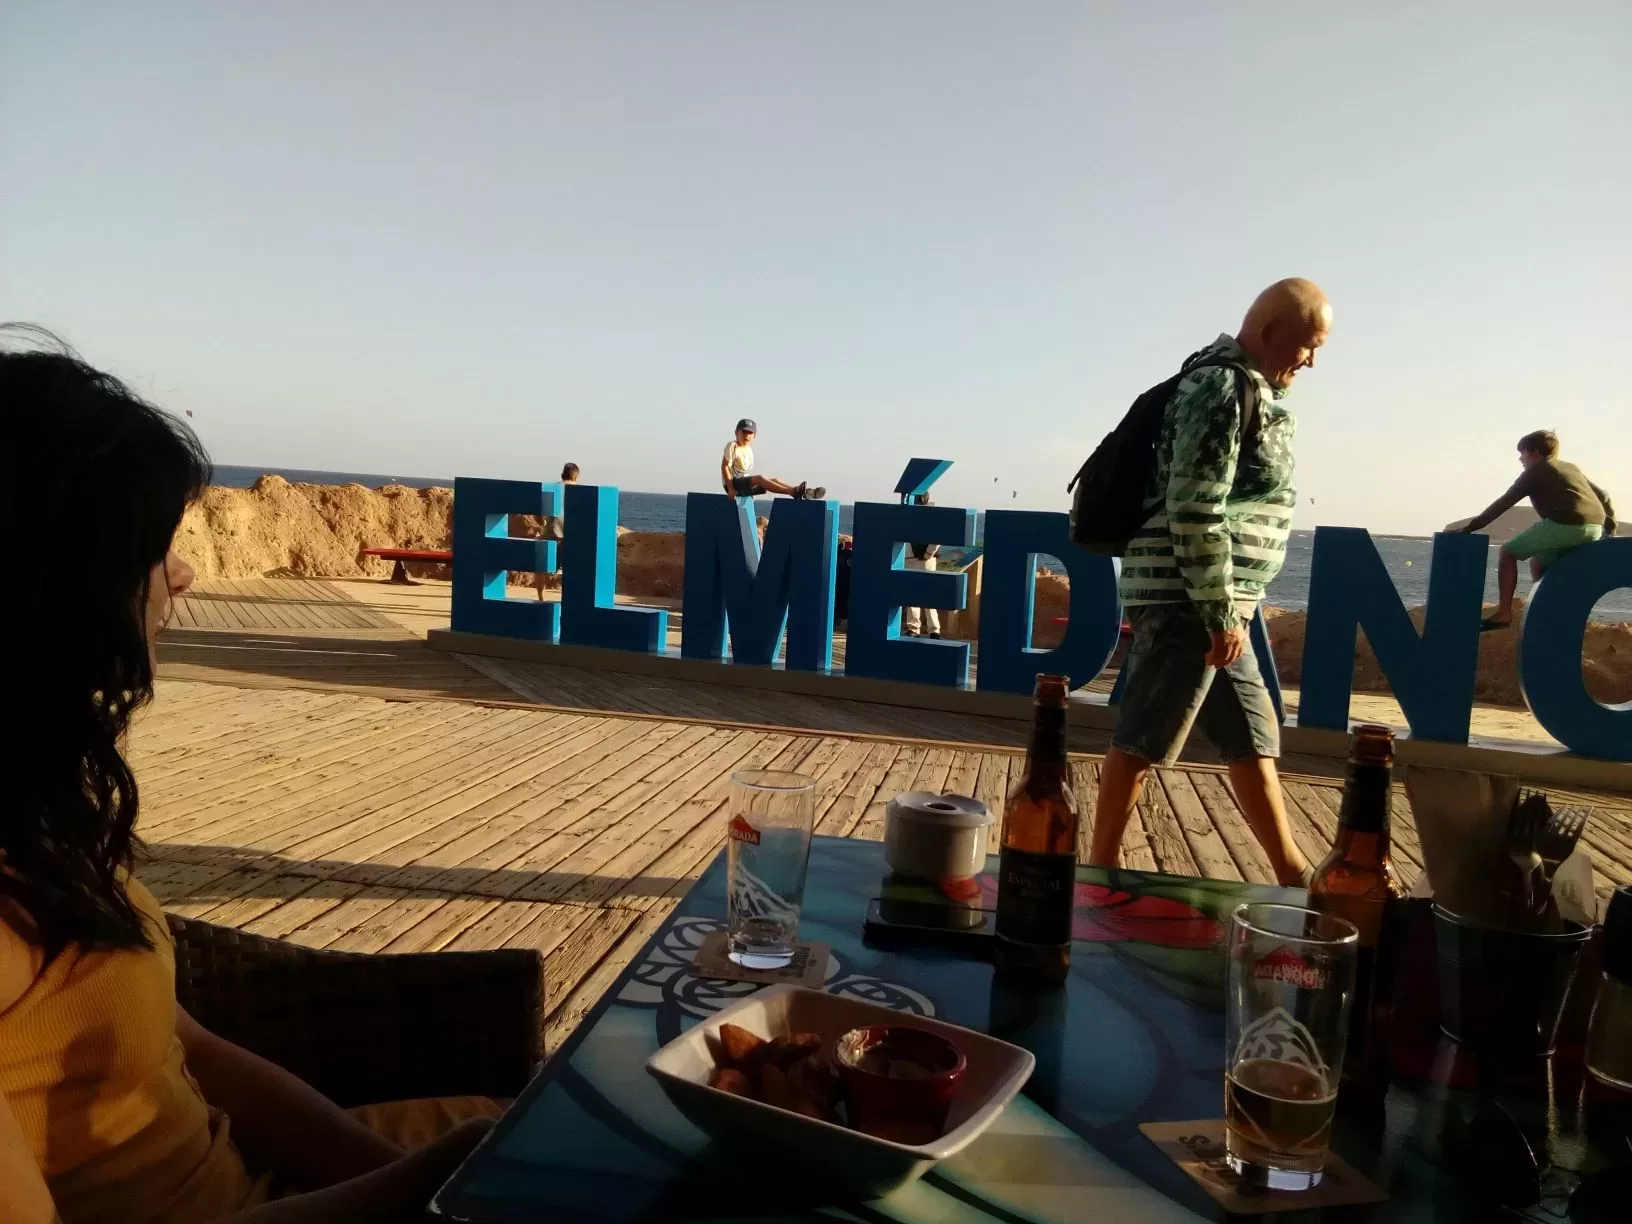 El Medano, where we were attacked by naked old people